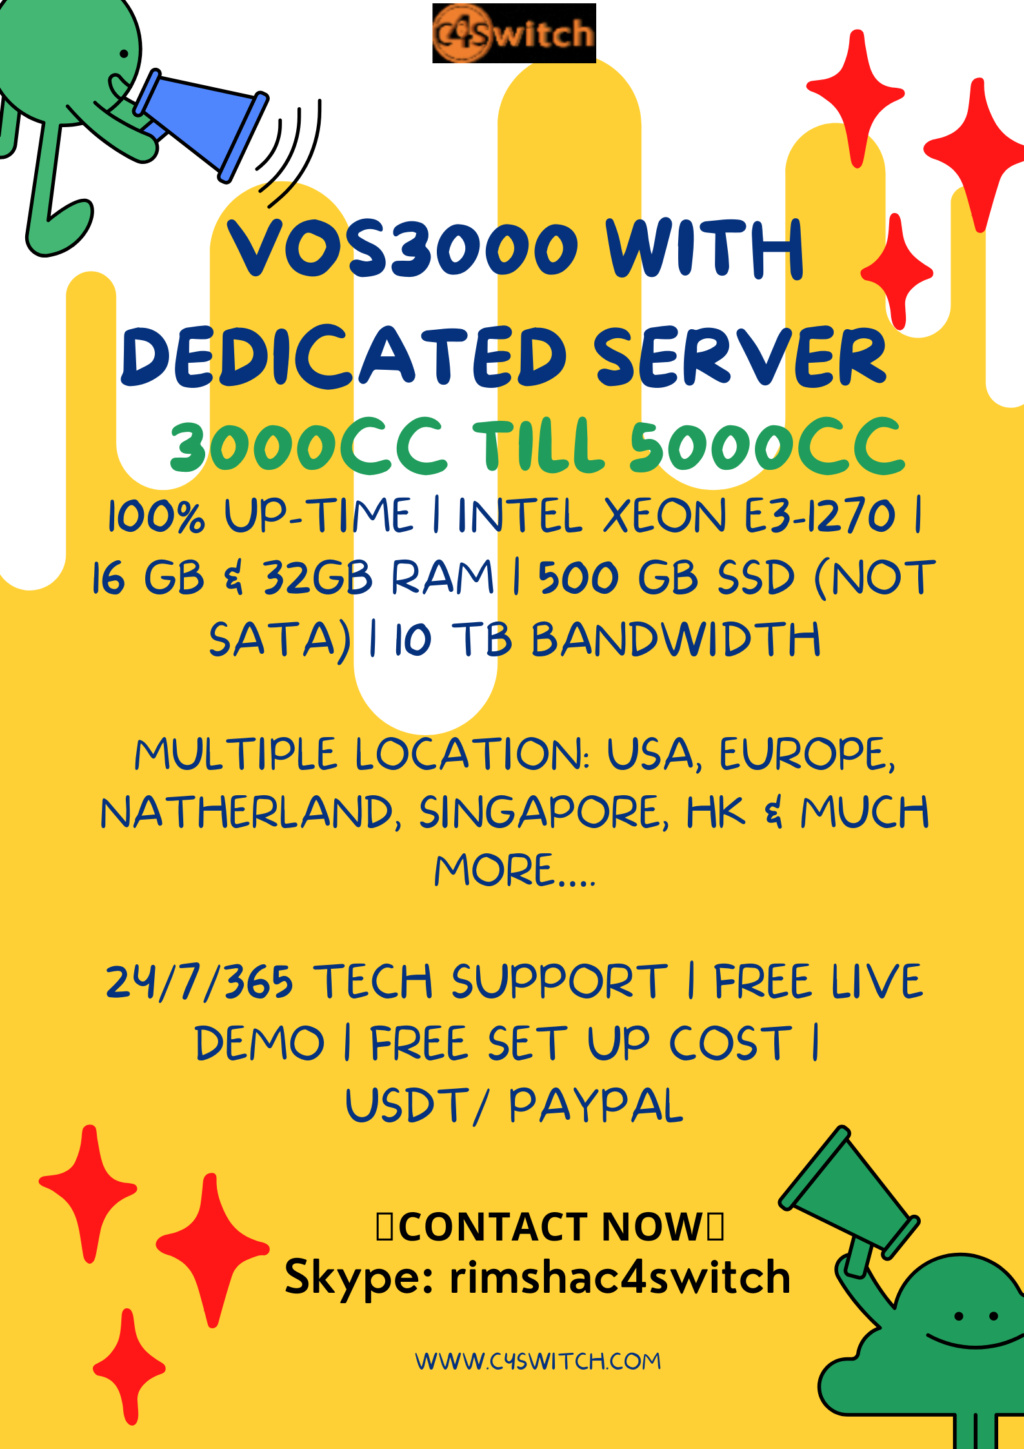 VOS3000 with DEDICATED SERVERS & MULTIPLE CO LOCATIONS.. Vos30015